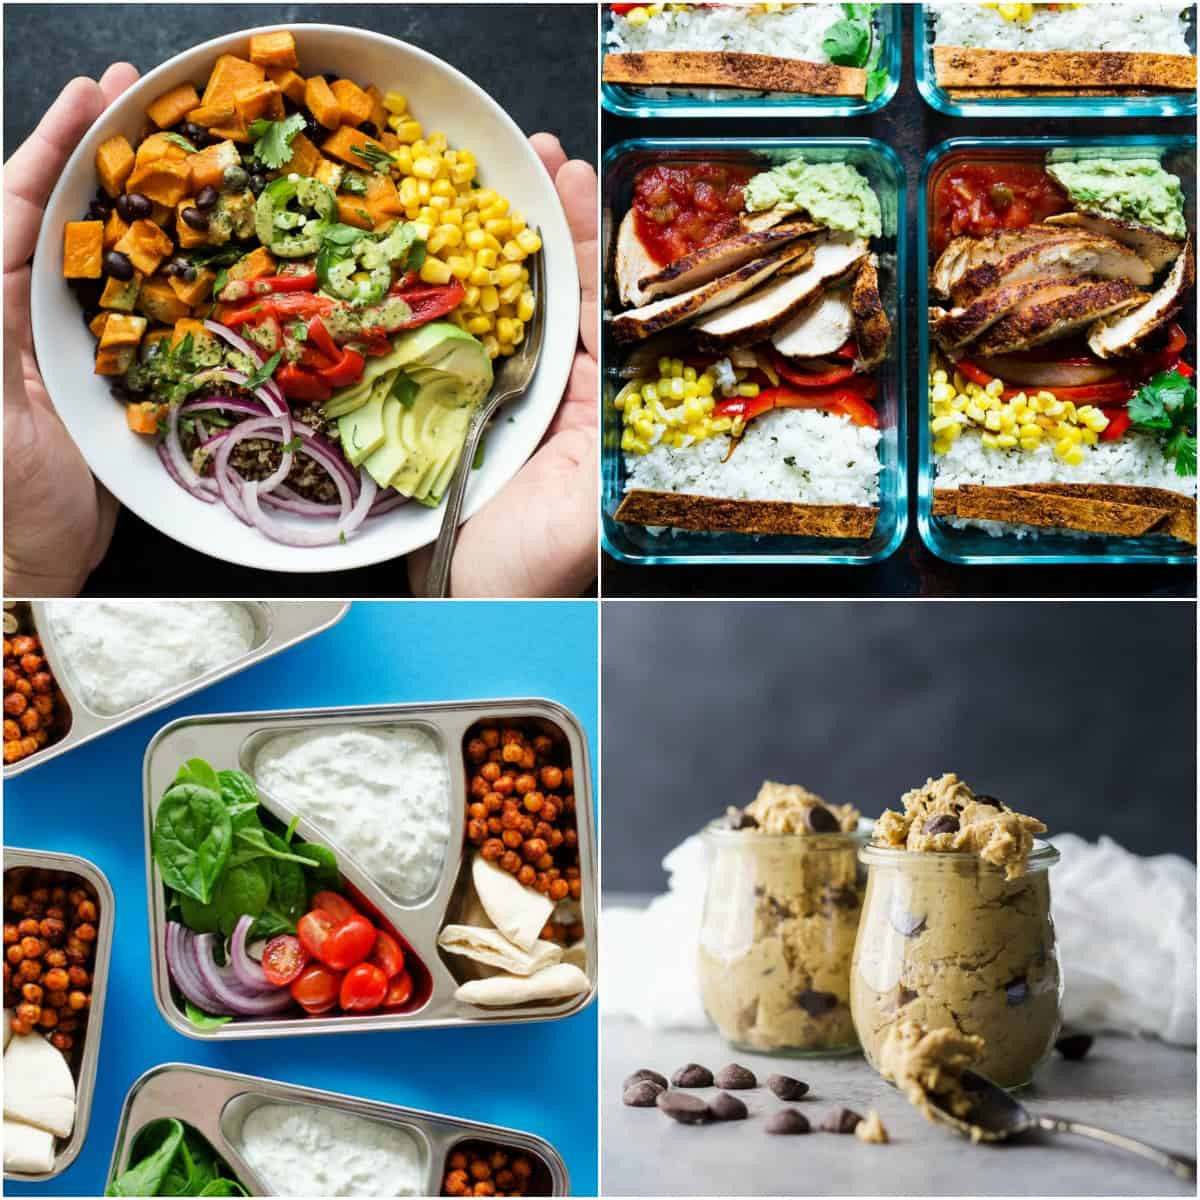 Healthy Breakfast For Dinner
 23 of the BEST Meal Prep Recipes for Breakfast Lunch